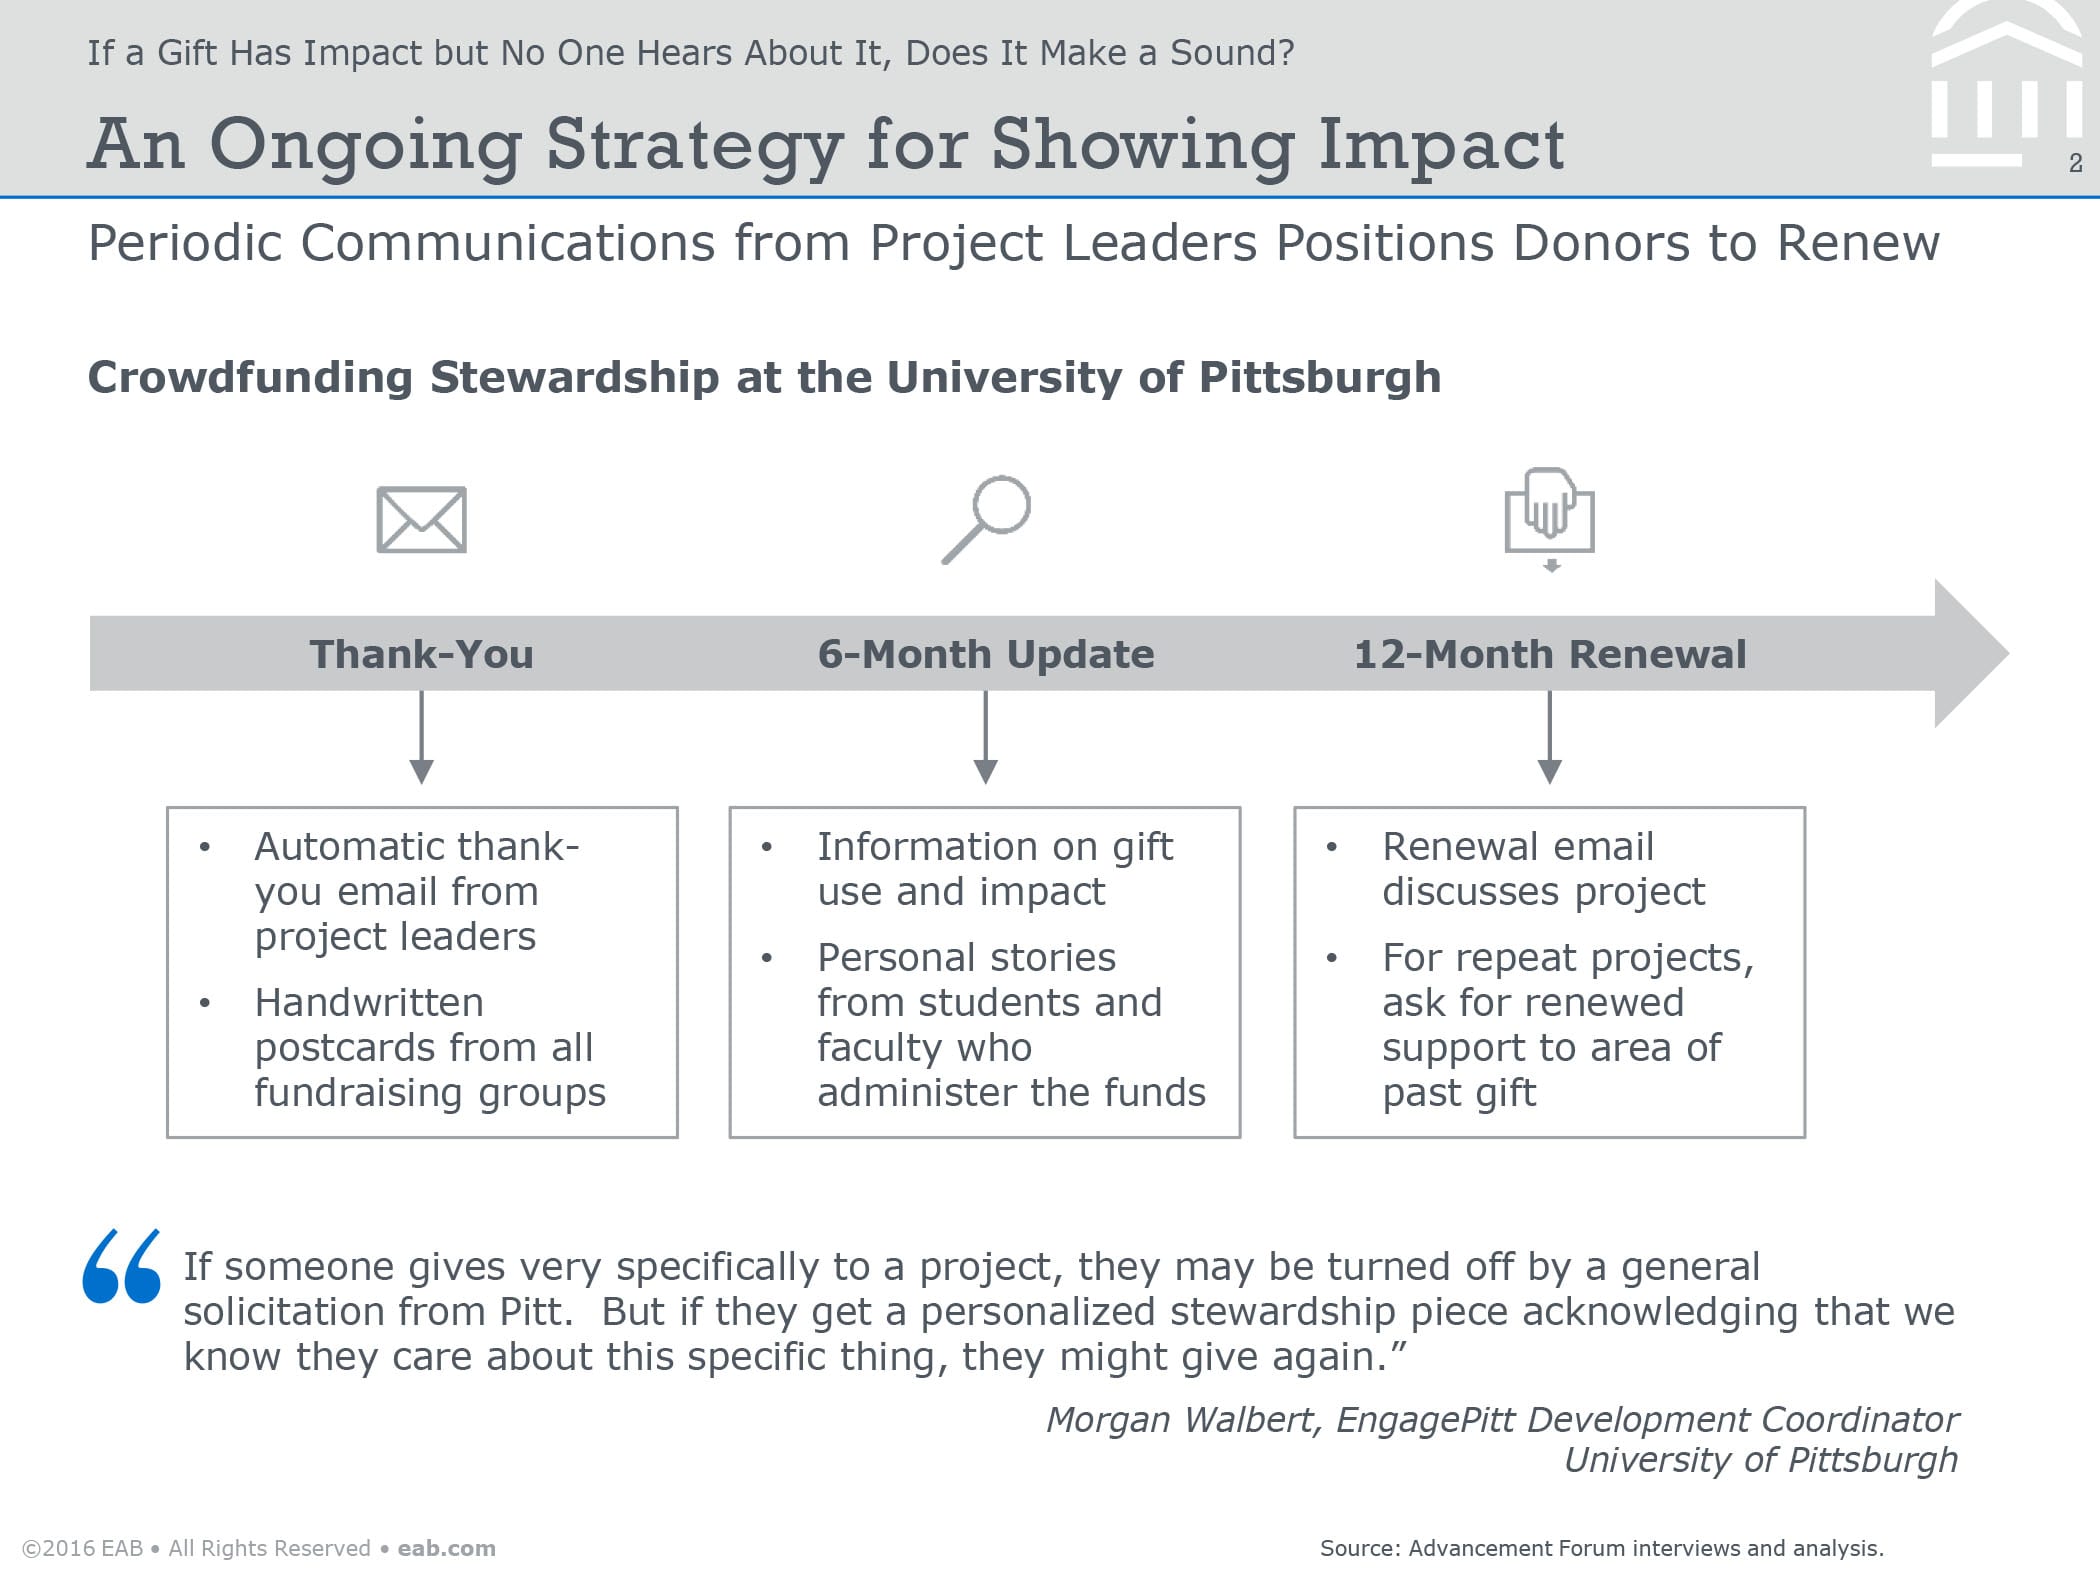 An ongoing strategy for showing impact